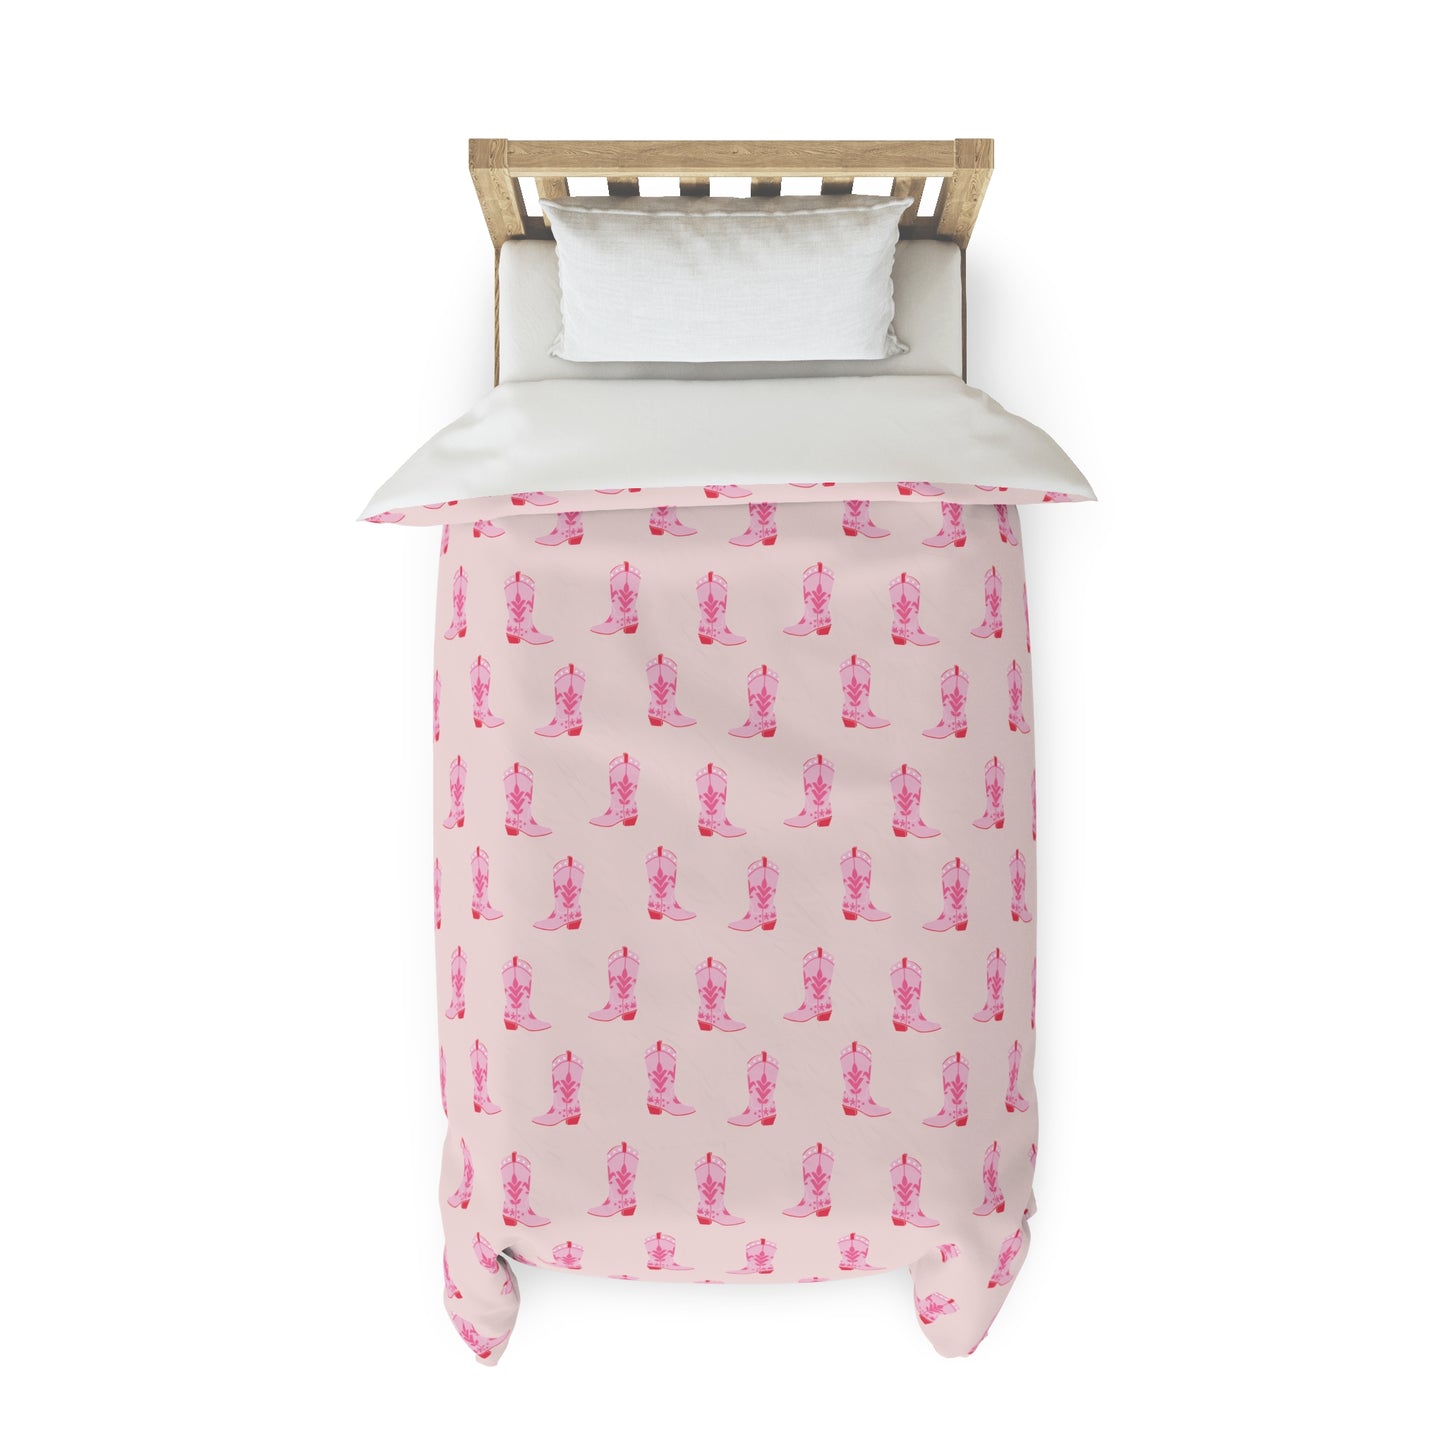 Cowgirl Boot Duvet Cover / Pink